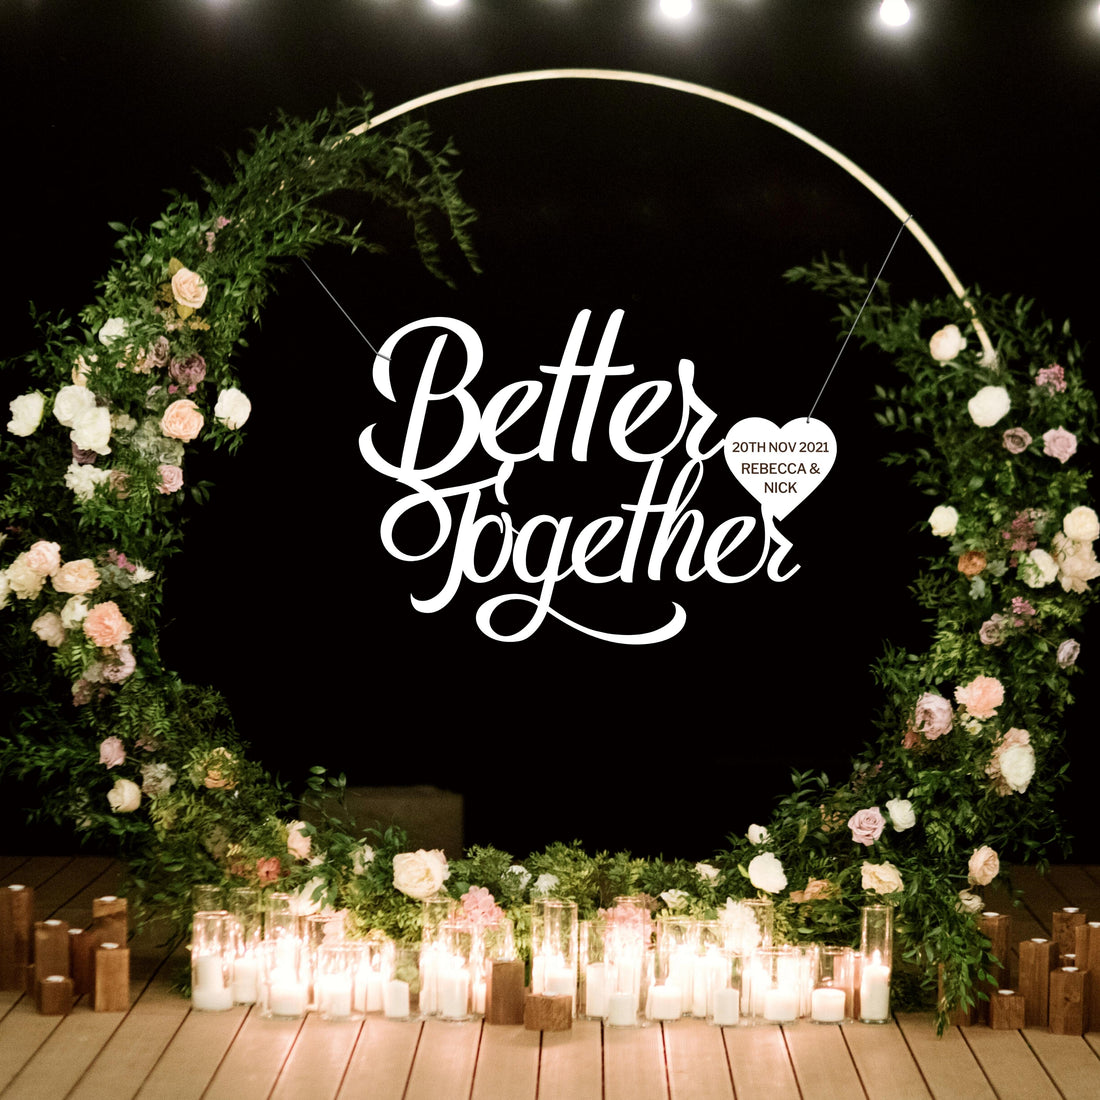 Custom Wooden/ Acrylic Better Together Wedding Hanging Sign, Personalised Name & Date Signage, Hedge Photo Prop, Event Wall Hoop, Bridal Shower, Anniversary, Stag Hens Party, Birthday Backdrop Decor